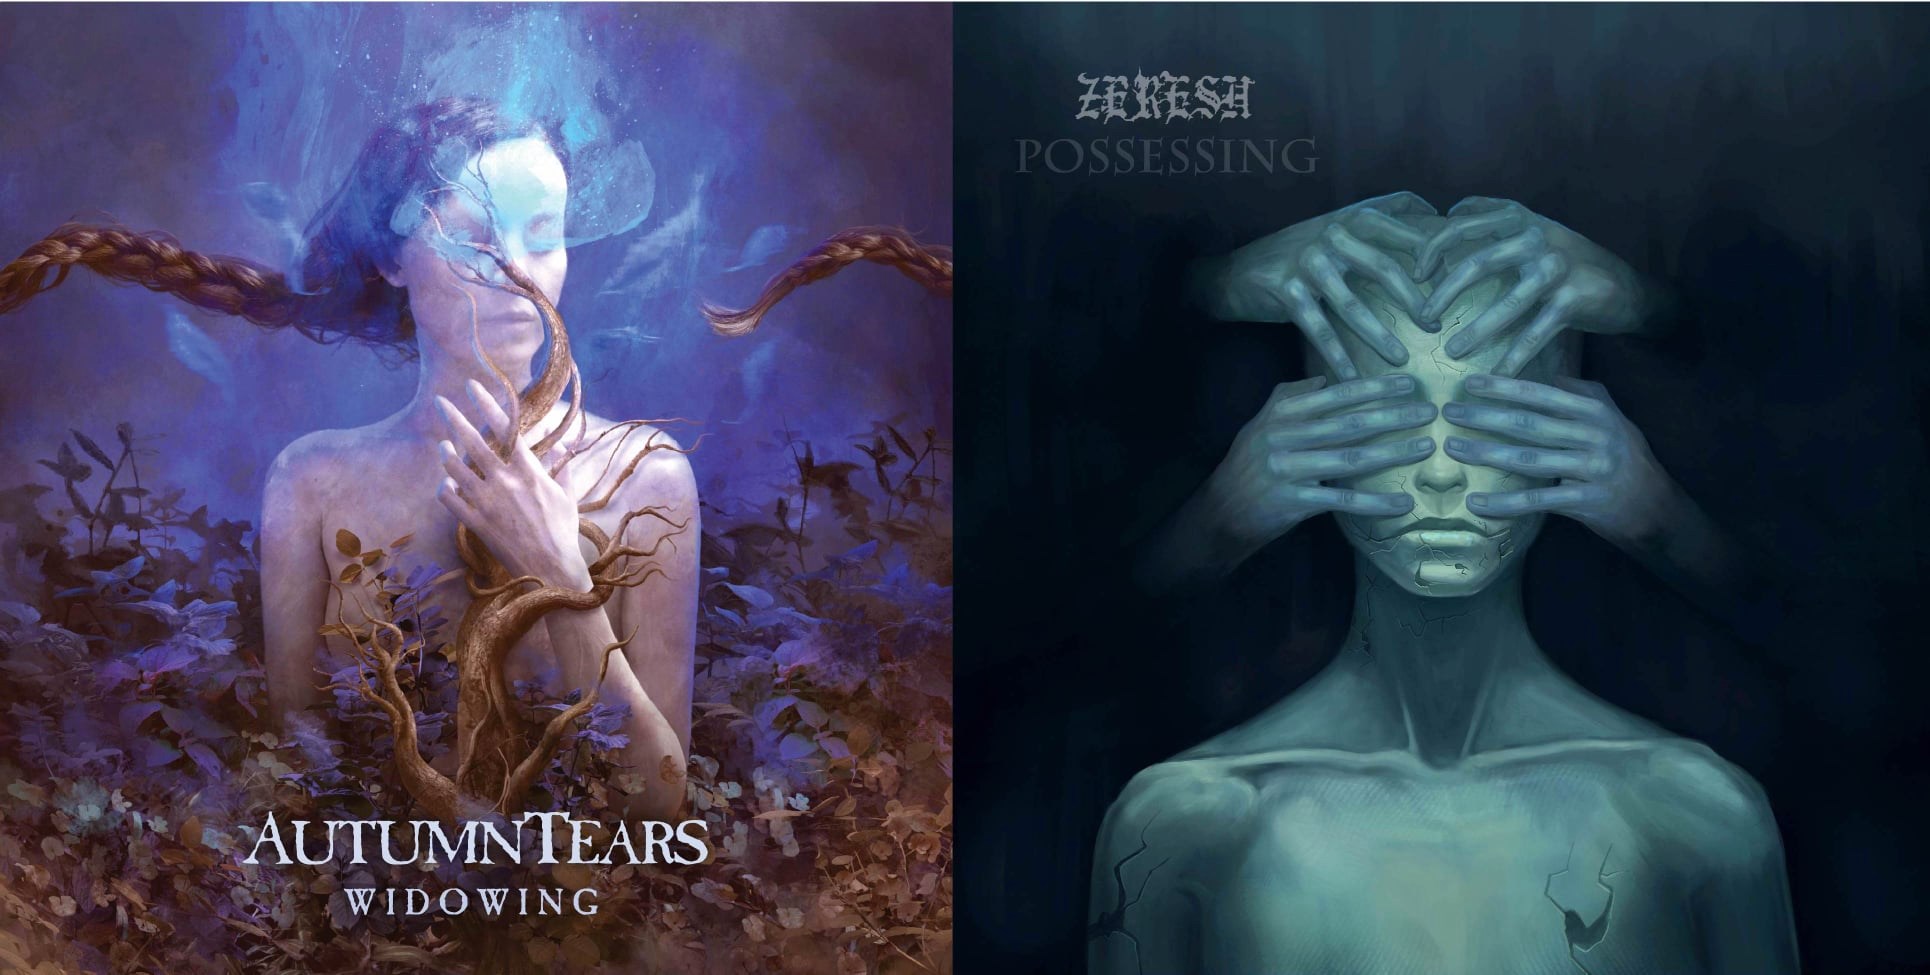 You are currently viewing Autumn Tears / Zeresh – Widowing / Possessing [Split]